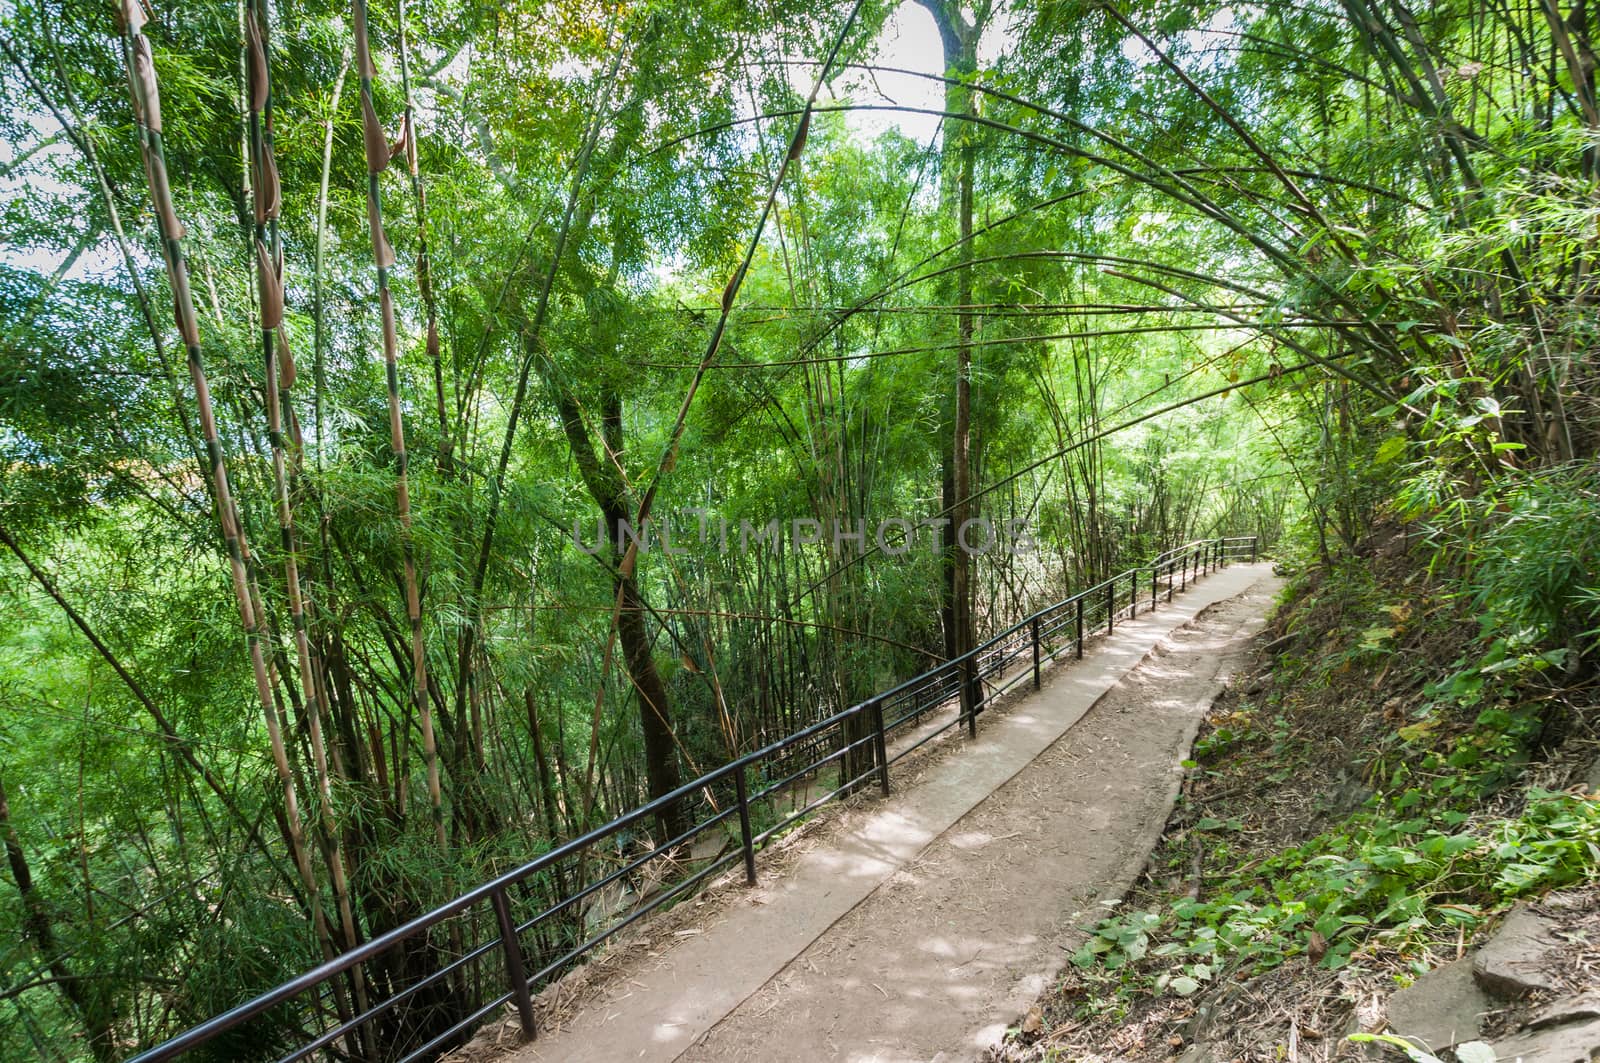 Walk path in forest, travel of Phukradueng, Loei province, Thailand